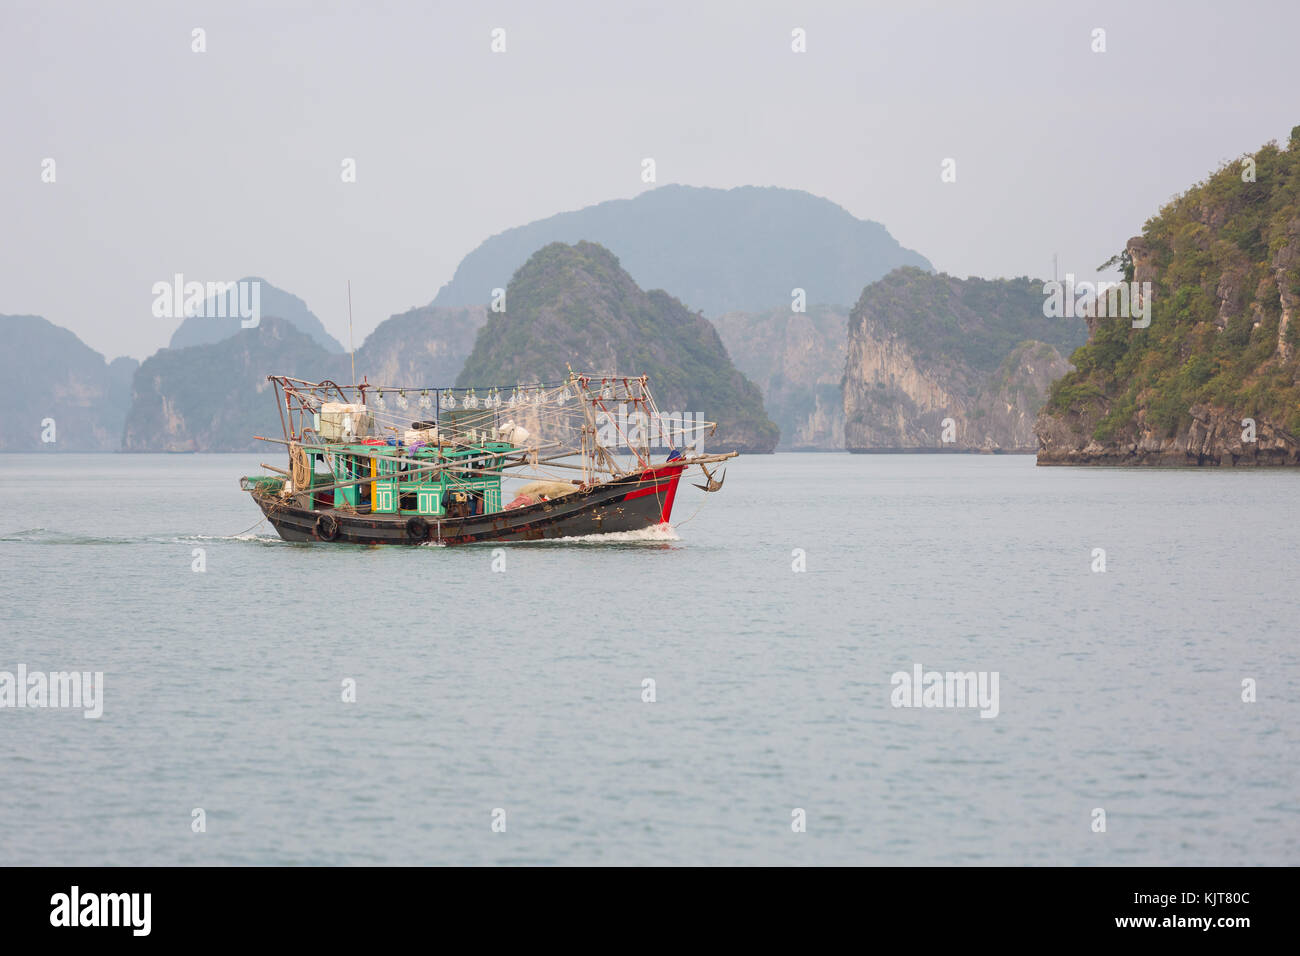 A small local fisher boat in Halong Bay, Vietnam Stock Photo